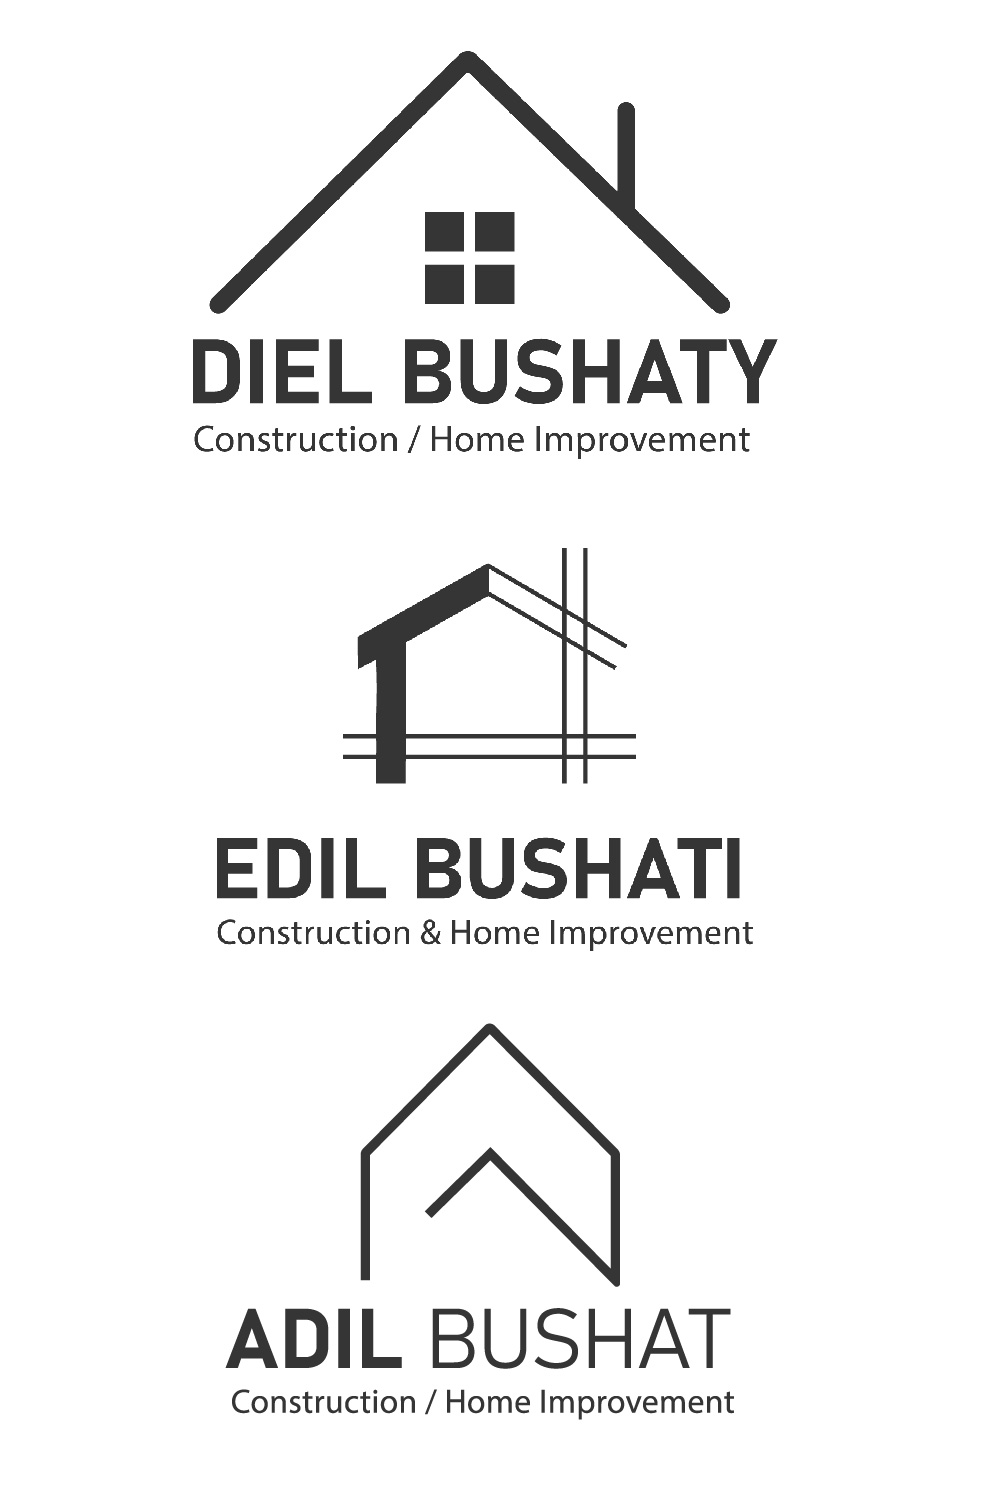 Constructions Logo is vector-based, fully editable pinterest preview image.